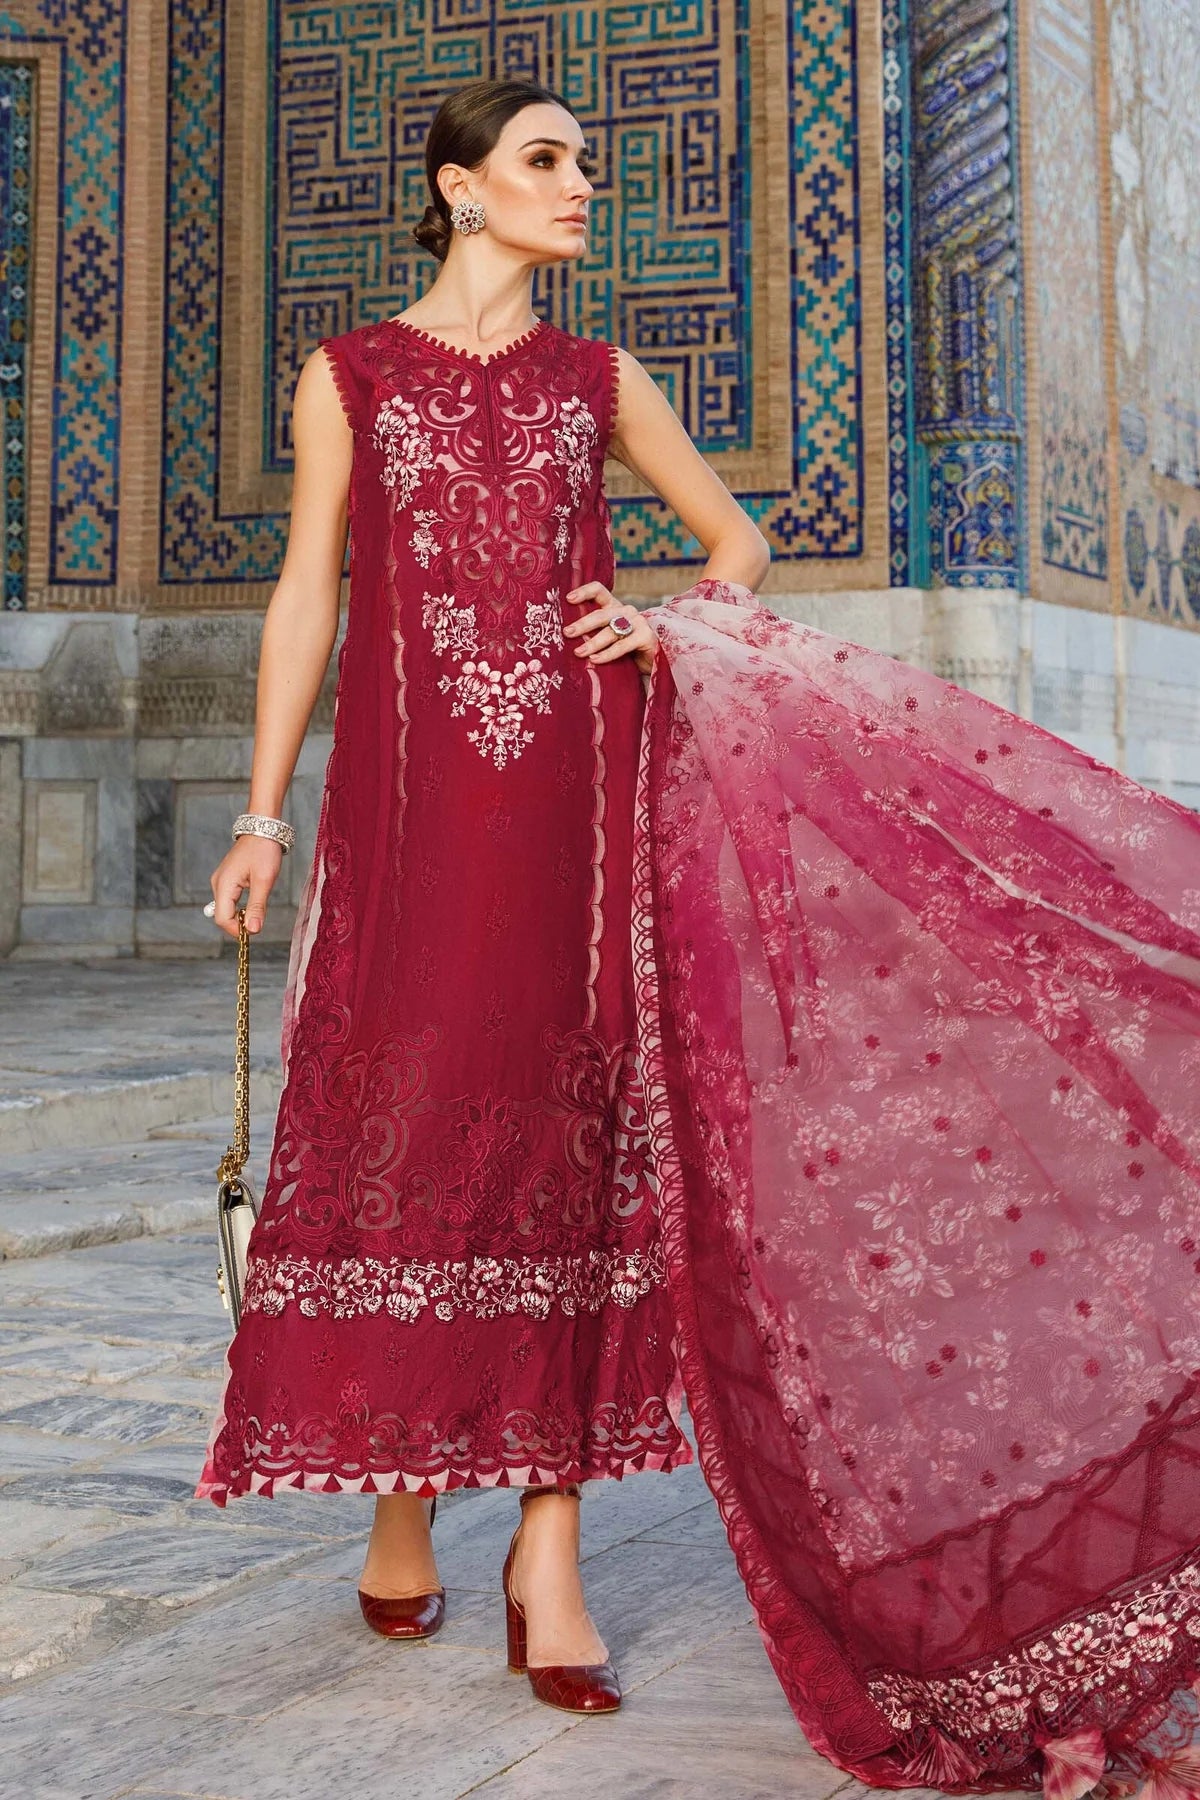 Maria B Inspired Maroon Long Kameez Lawn 3 Piece Outfit With Full Sleeves - Desi Posh